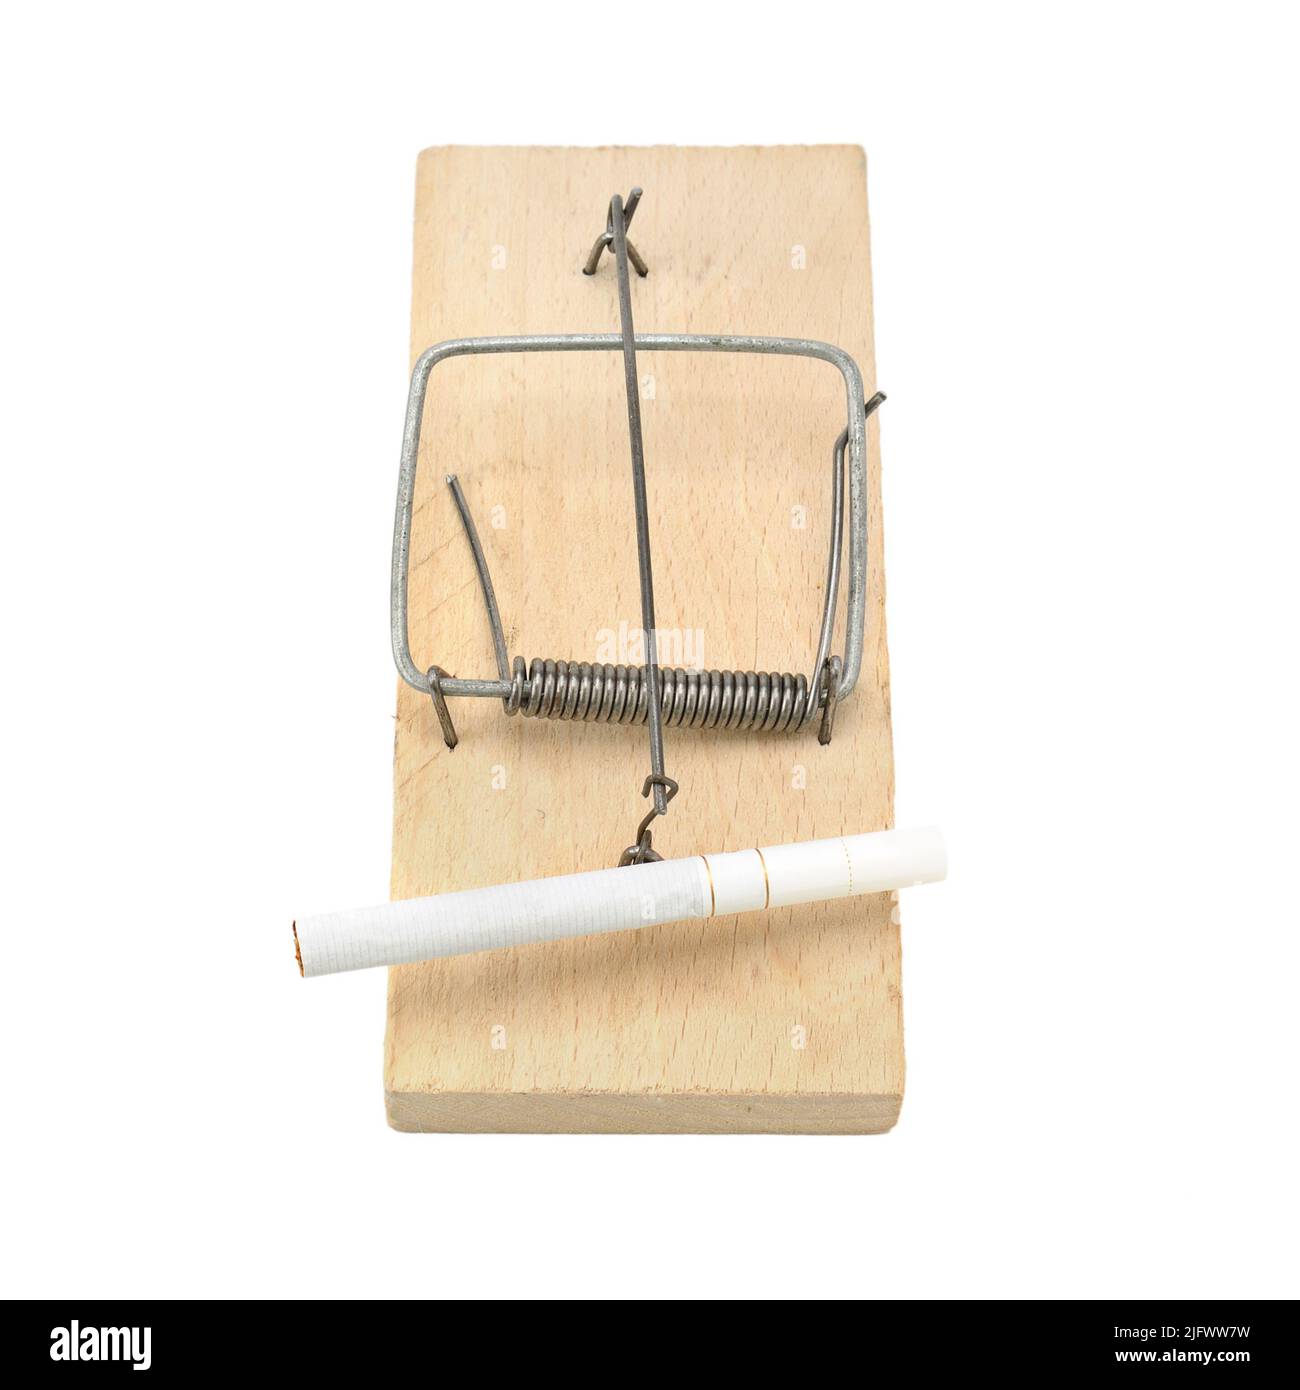 Cigarette in a mousetrap. Concept - the hazards of smoking. Stock Photo